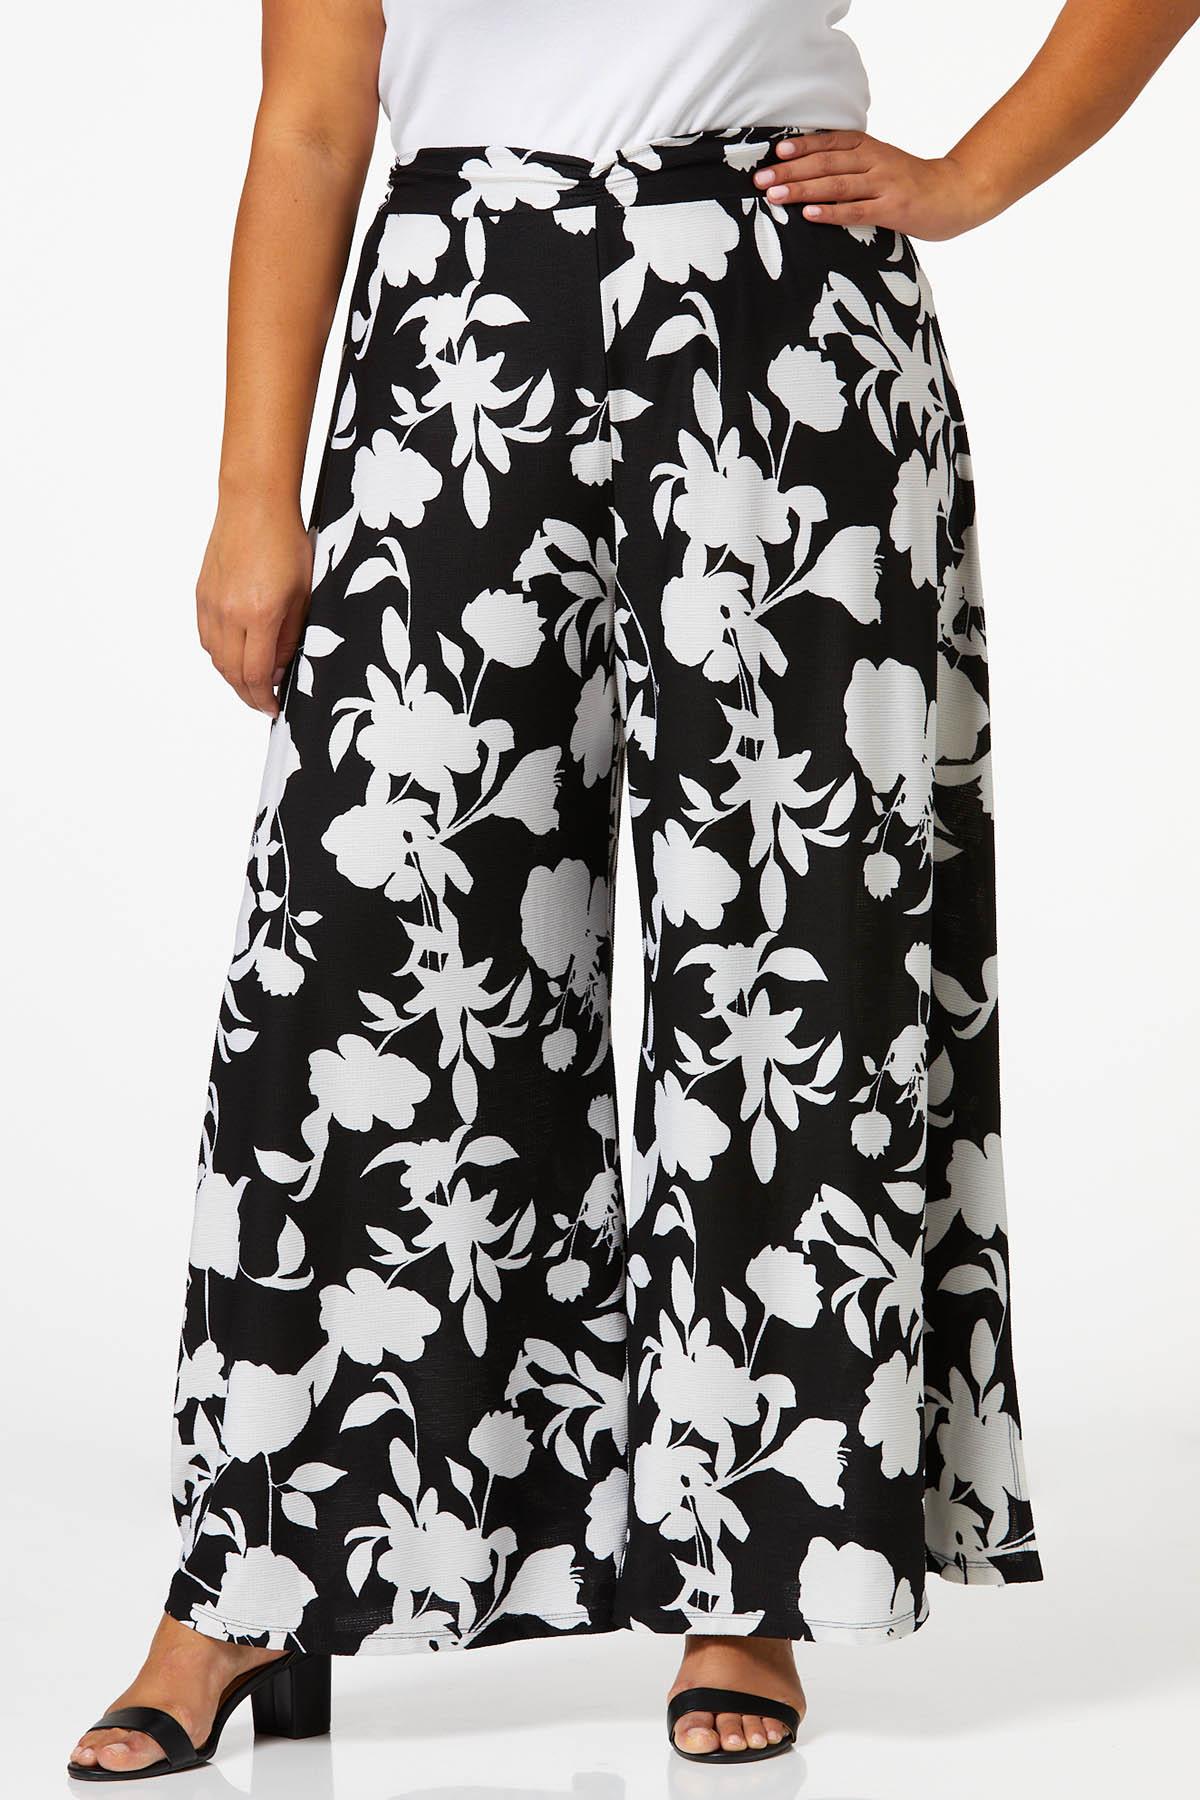 Cato Fashions  Cato Plus Size Textured Floral Wide Leg Pants